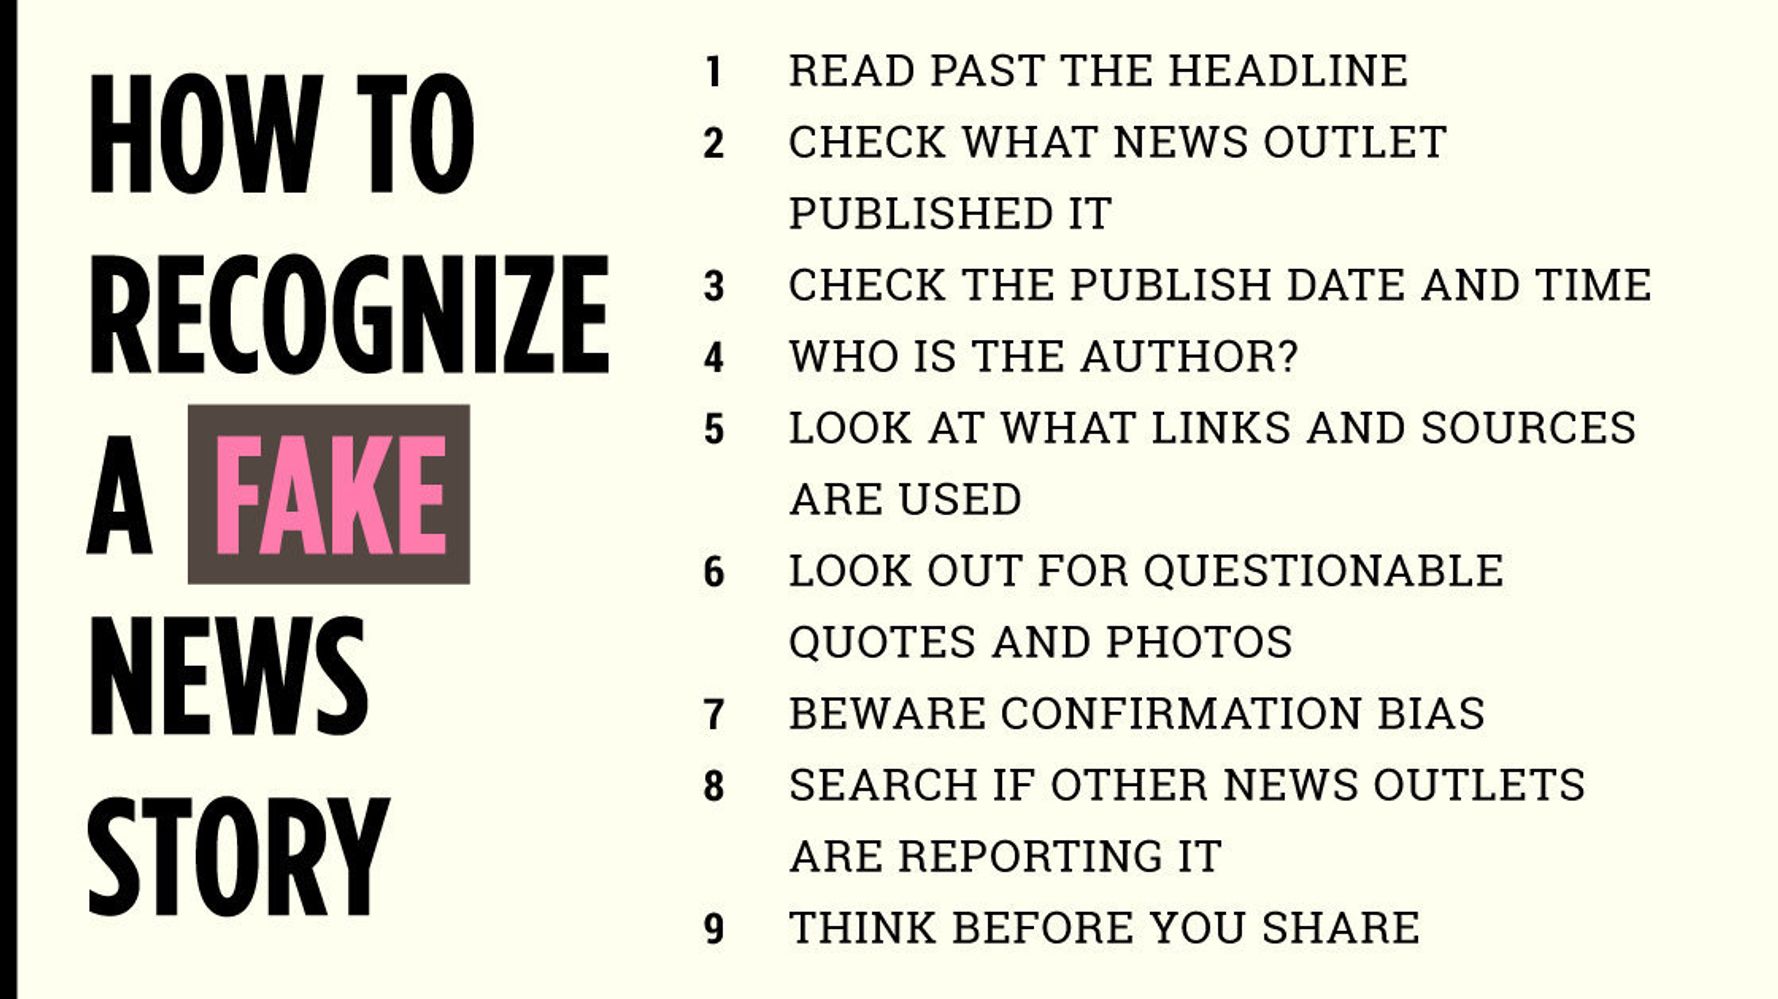 How to stand out in an era of fake news stories underlined